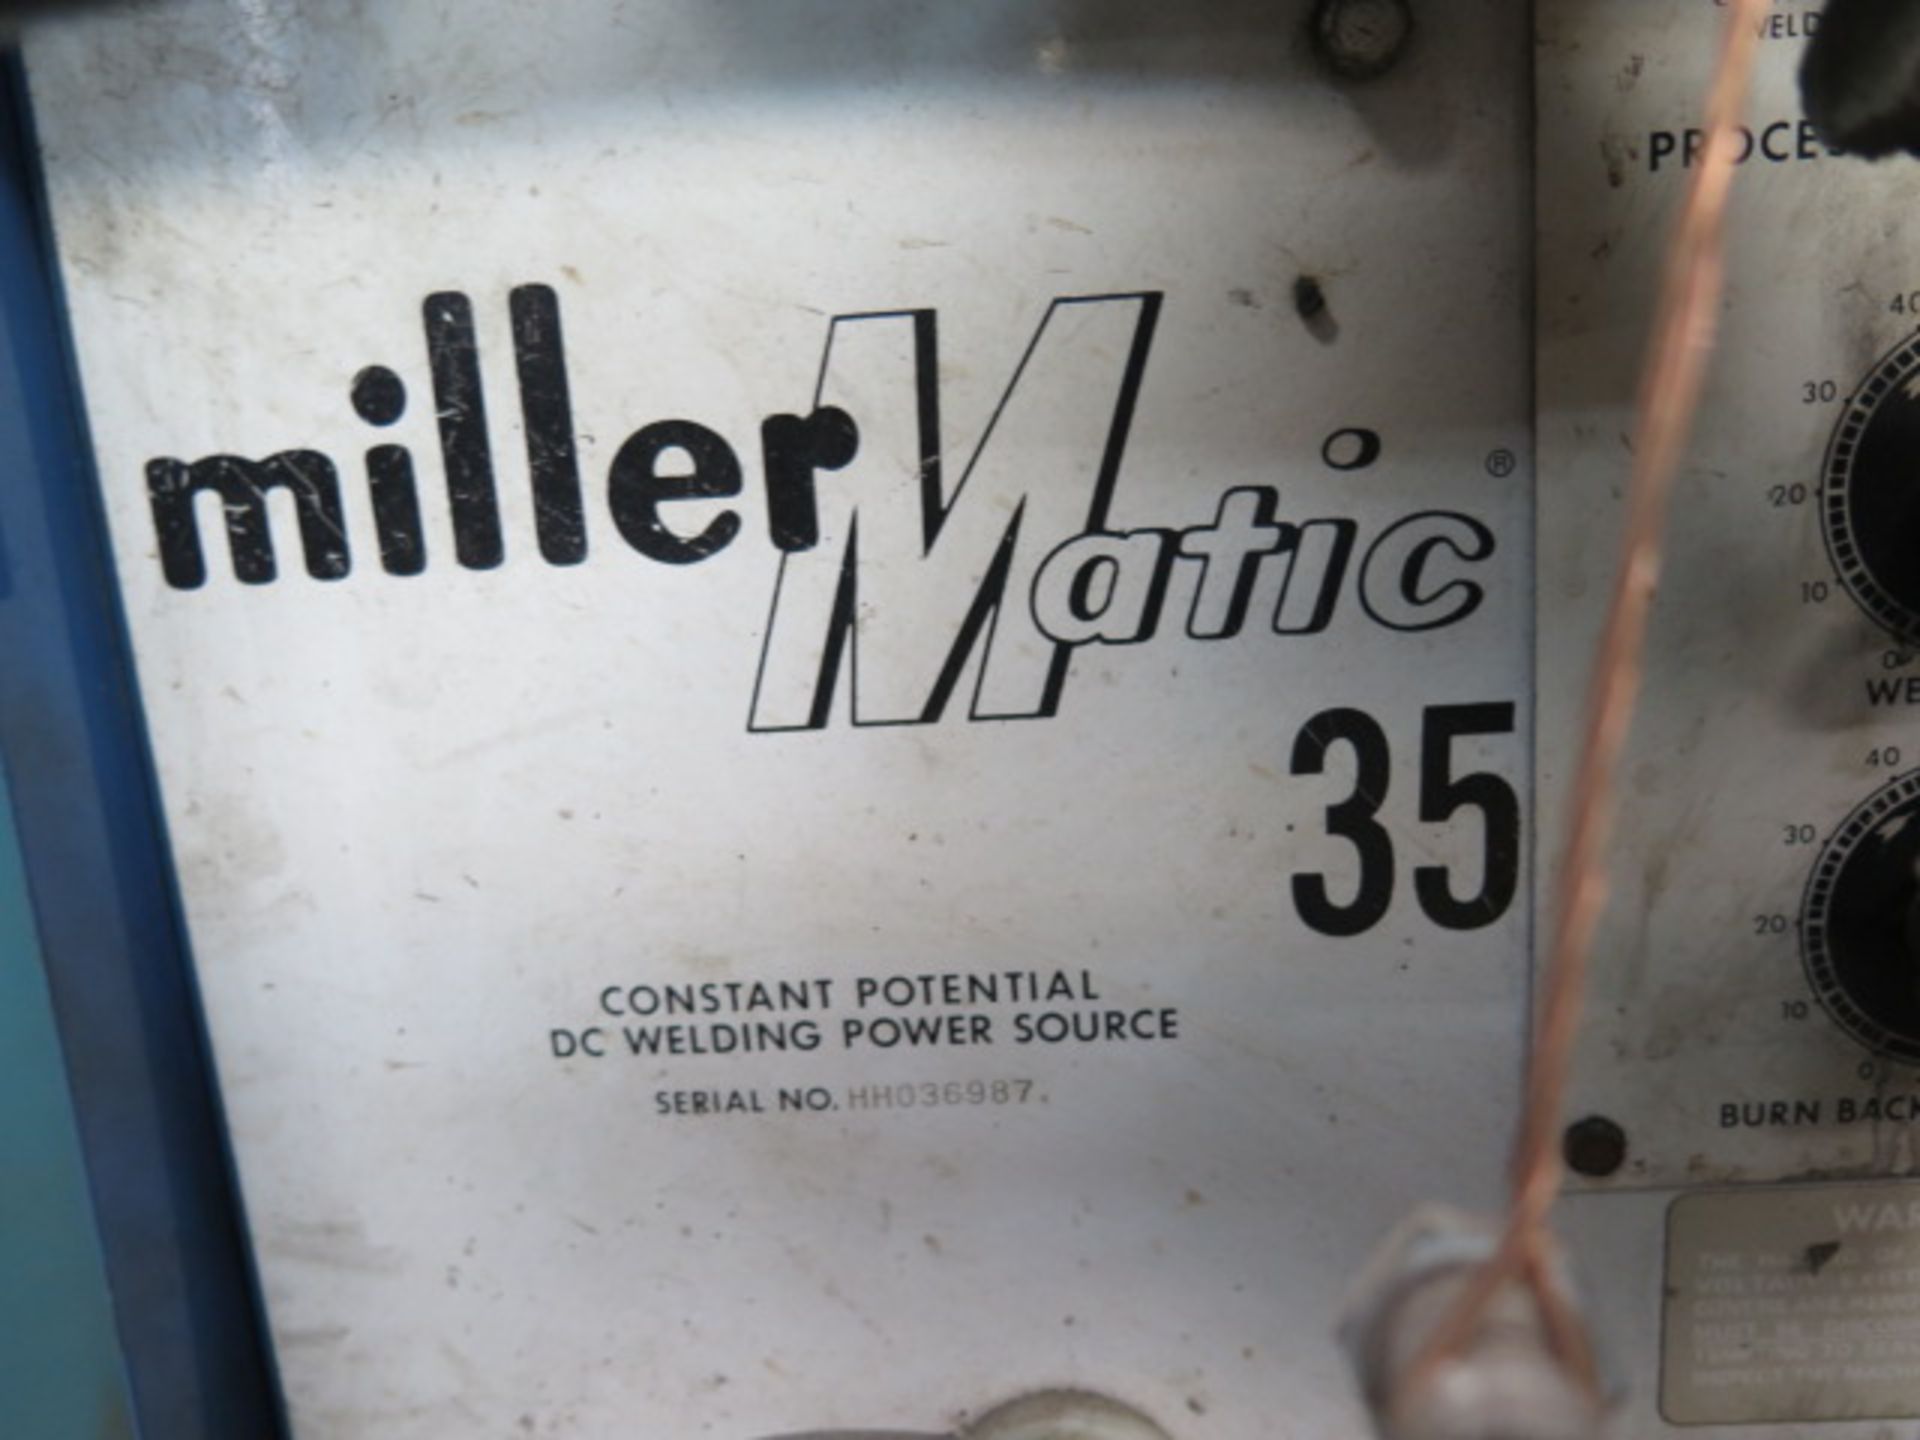 Miller illermatic 35 CP-DC Arc Welding Power Source (NO TANK) (SOLD AS-IS - NO WARRANTY) - Image 6 of 6